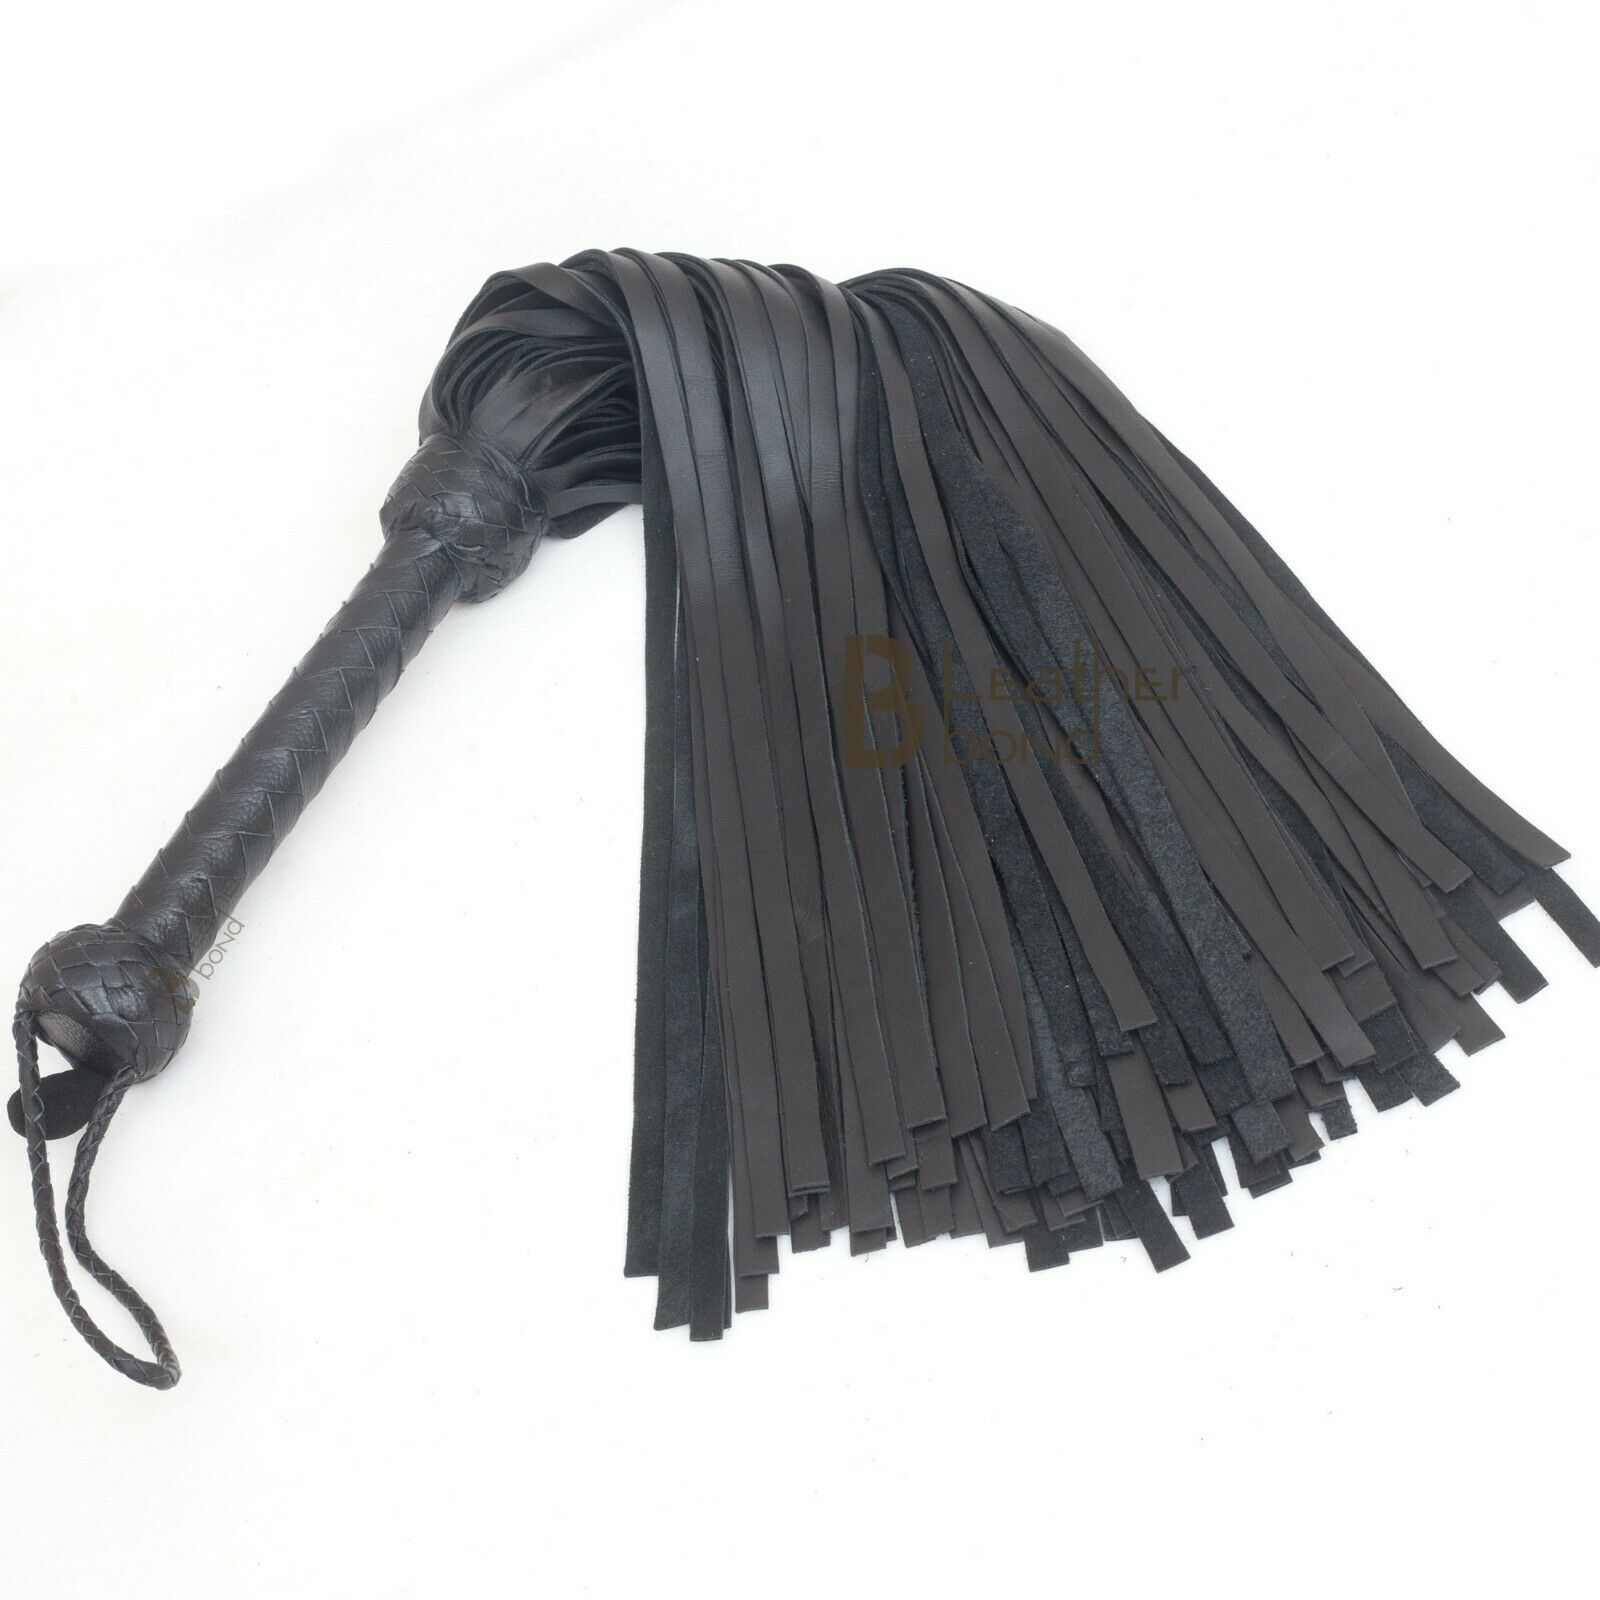 Real Genuine Cow Hide Leather Flogger 100 Falls Black Heavy Duty Thuddy Whip